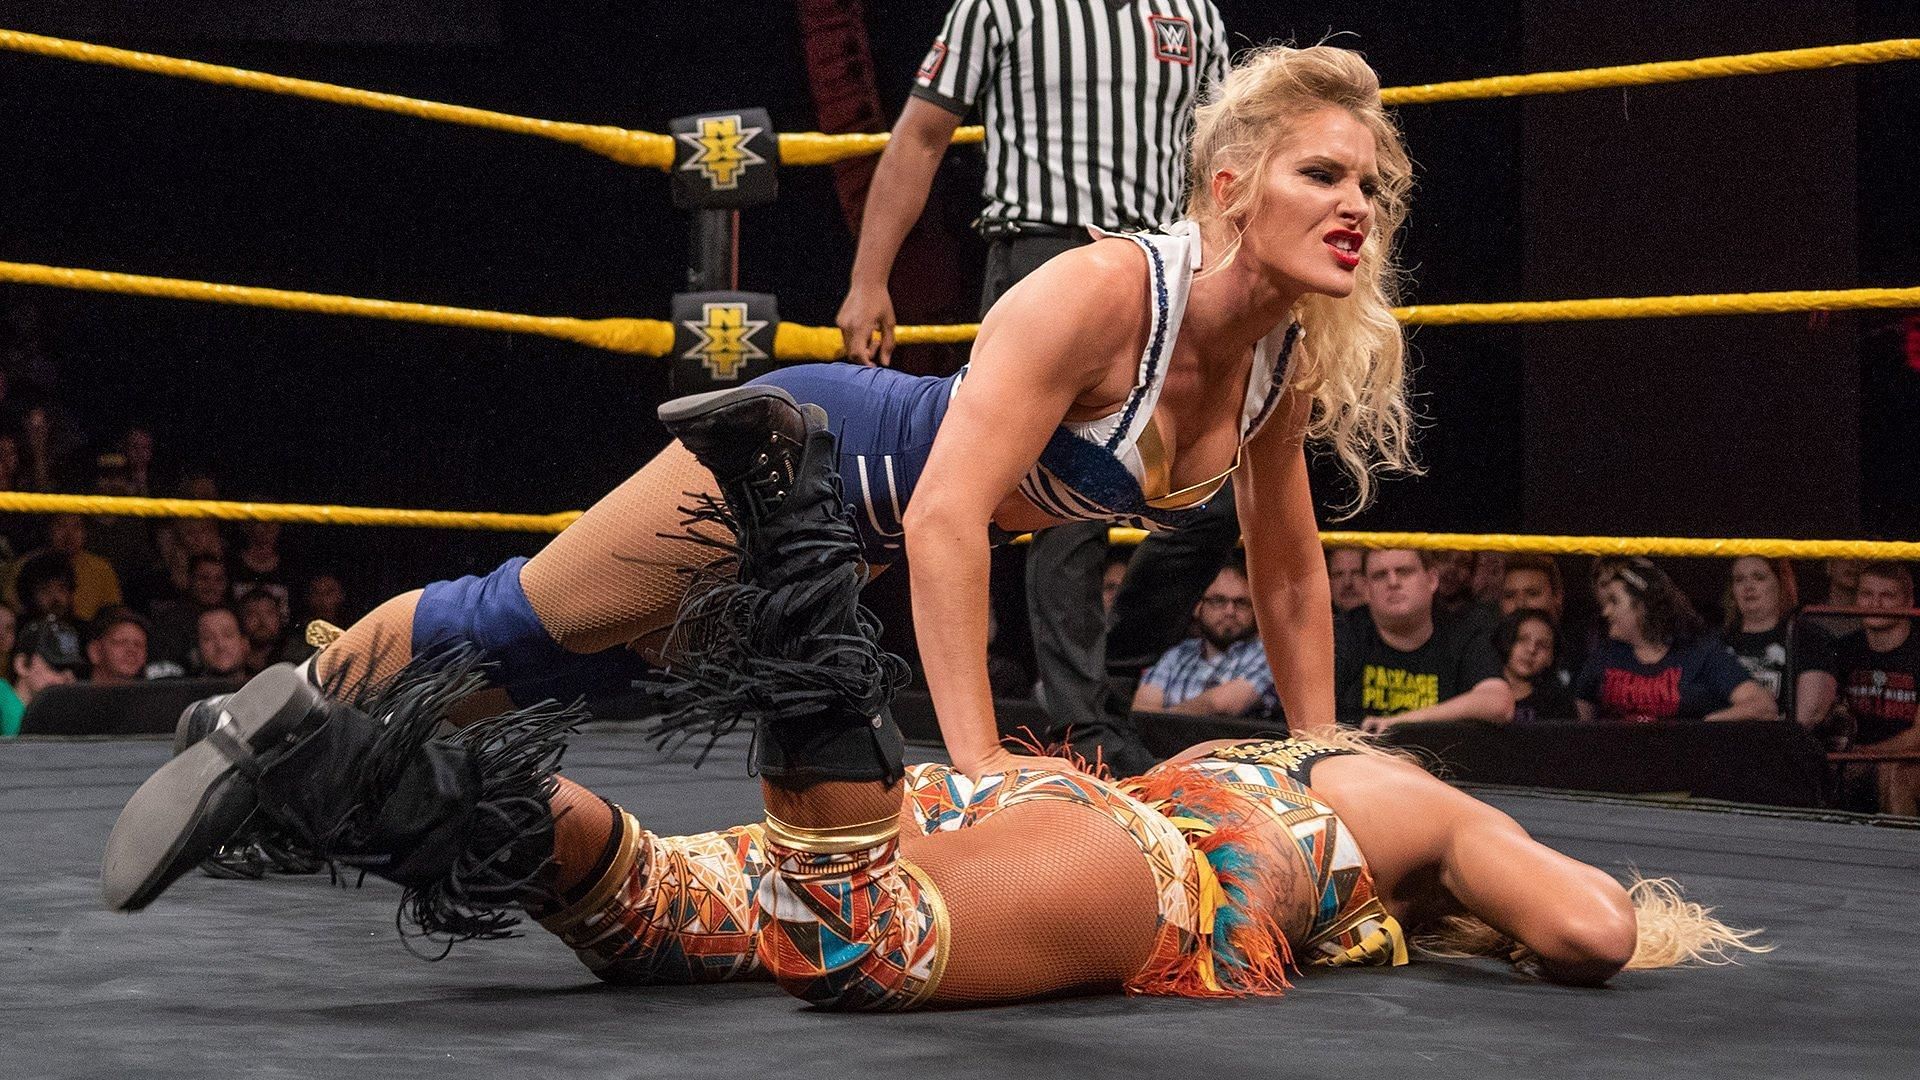 Lacey Evans was a military police officer in the Marines